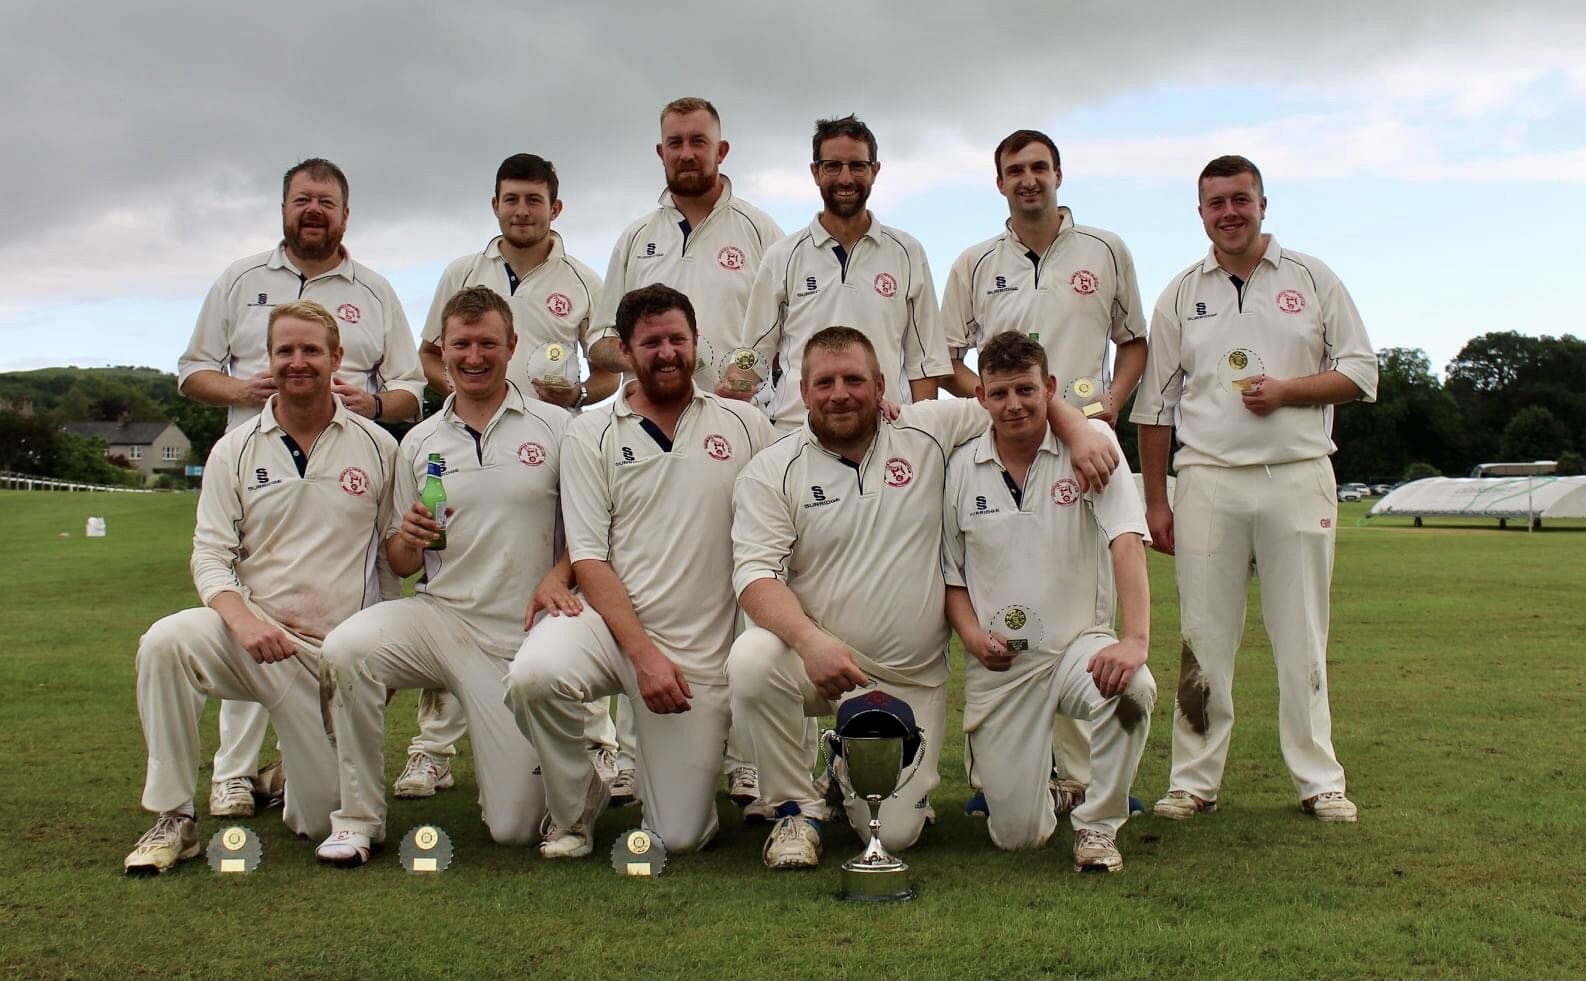 CRICKET: Shireshead who won the Hackney and Leigh Trophy at Cartmel